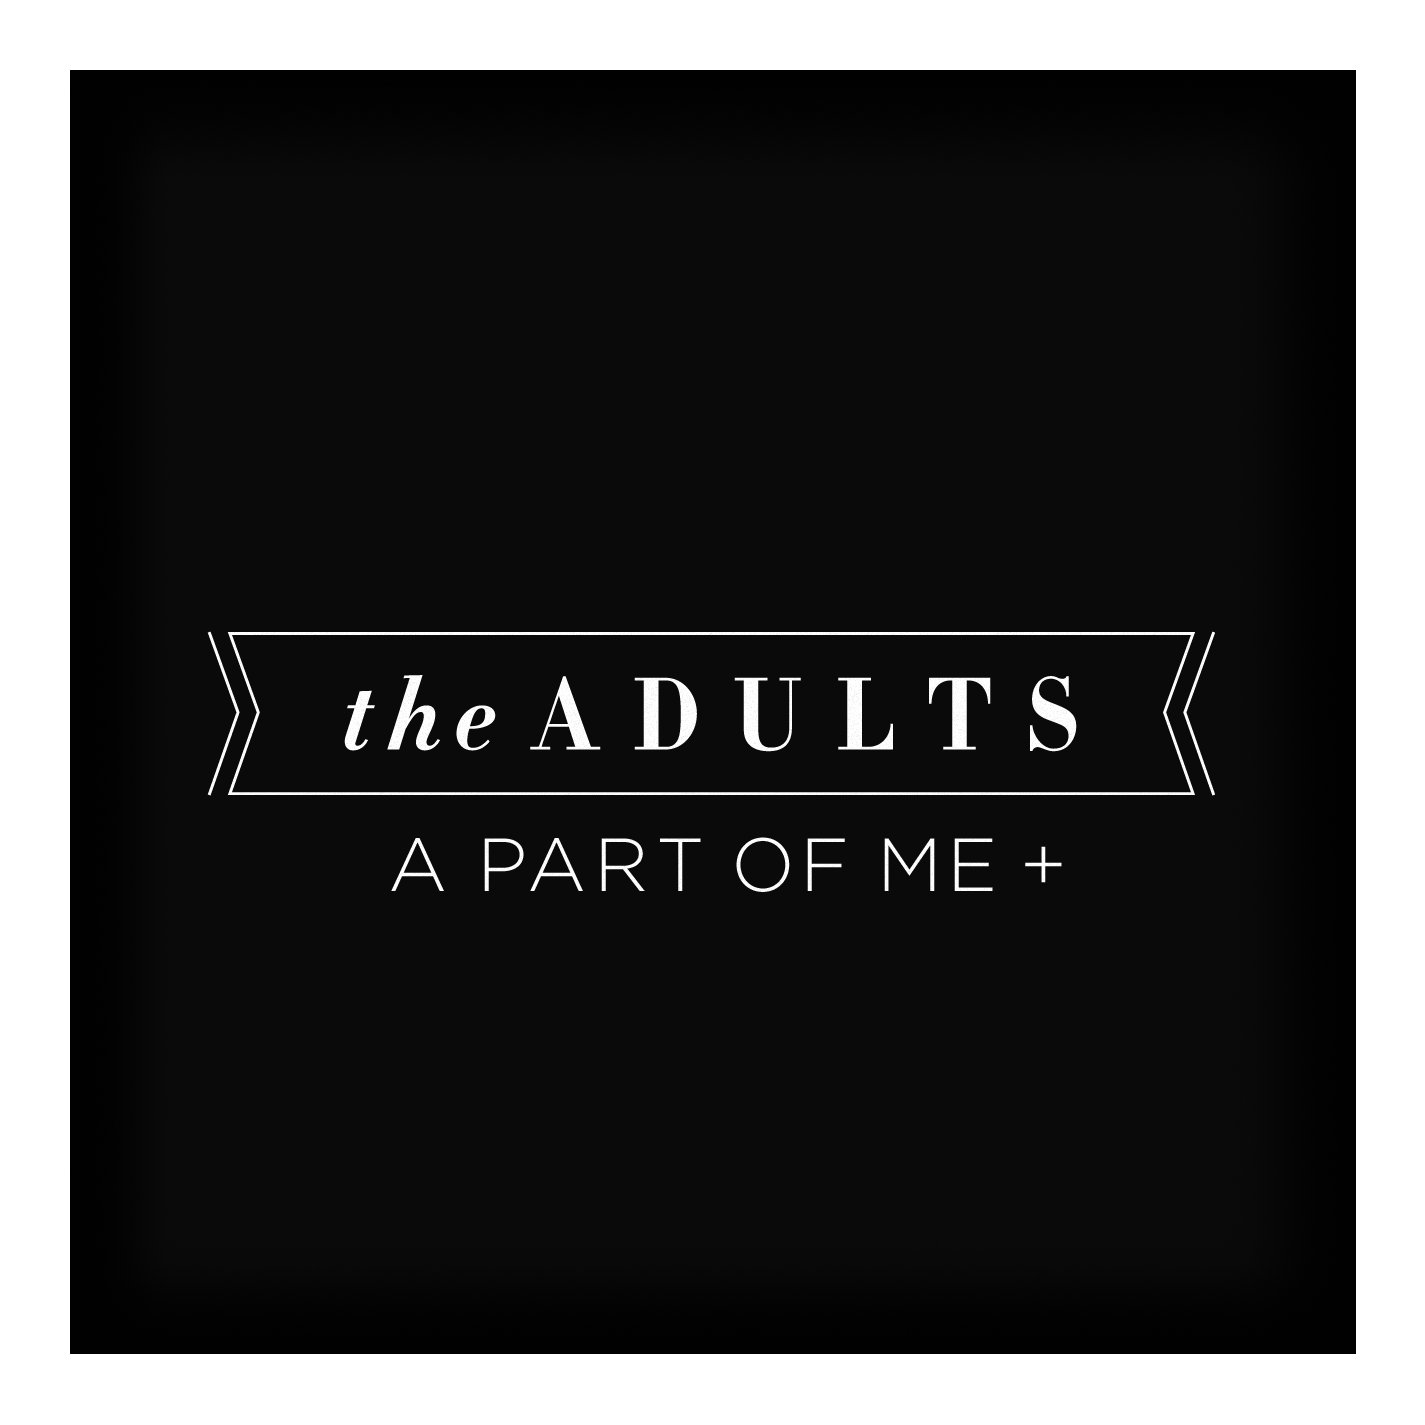 The Adults - A Part of Me+.jpg